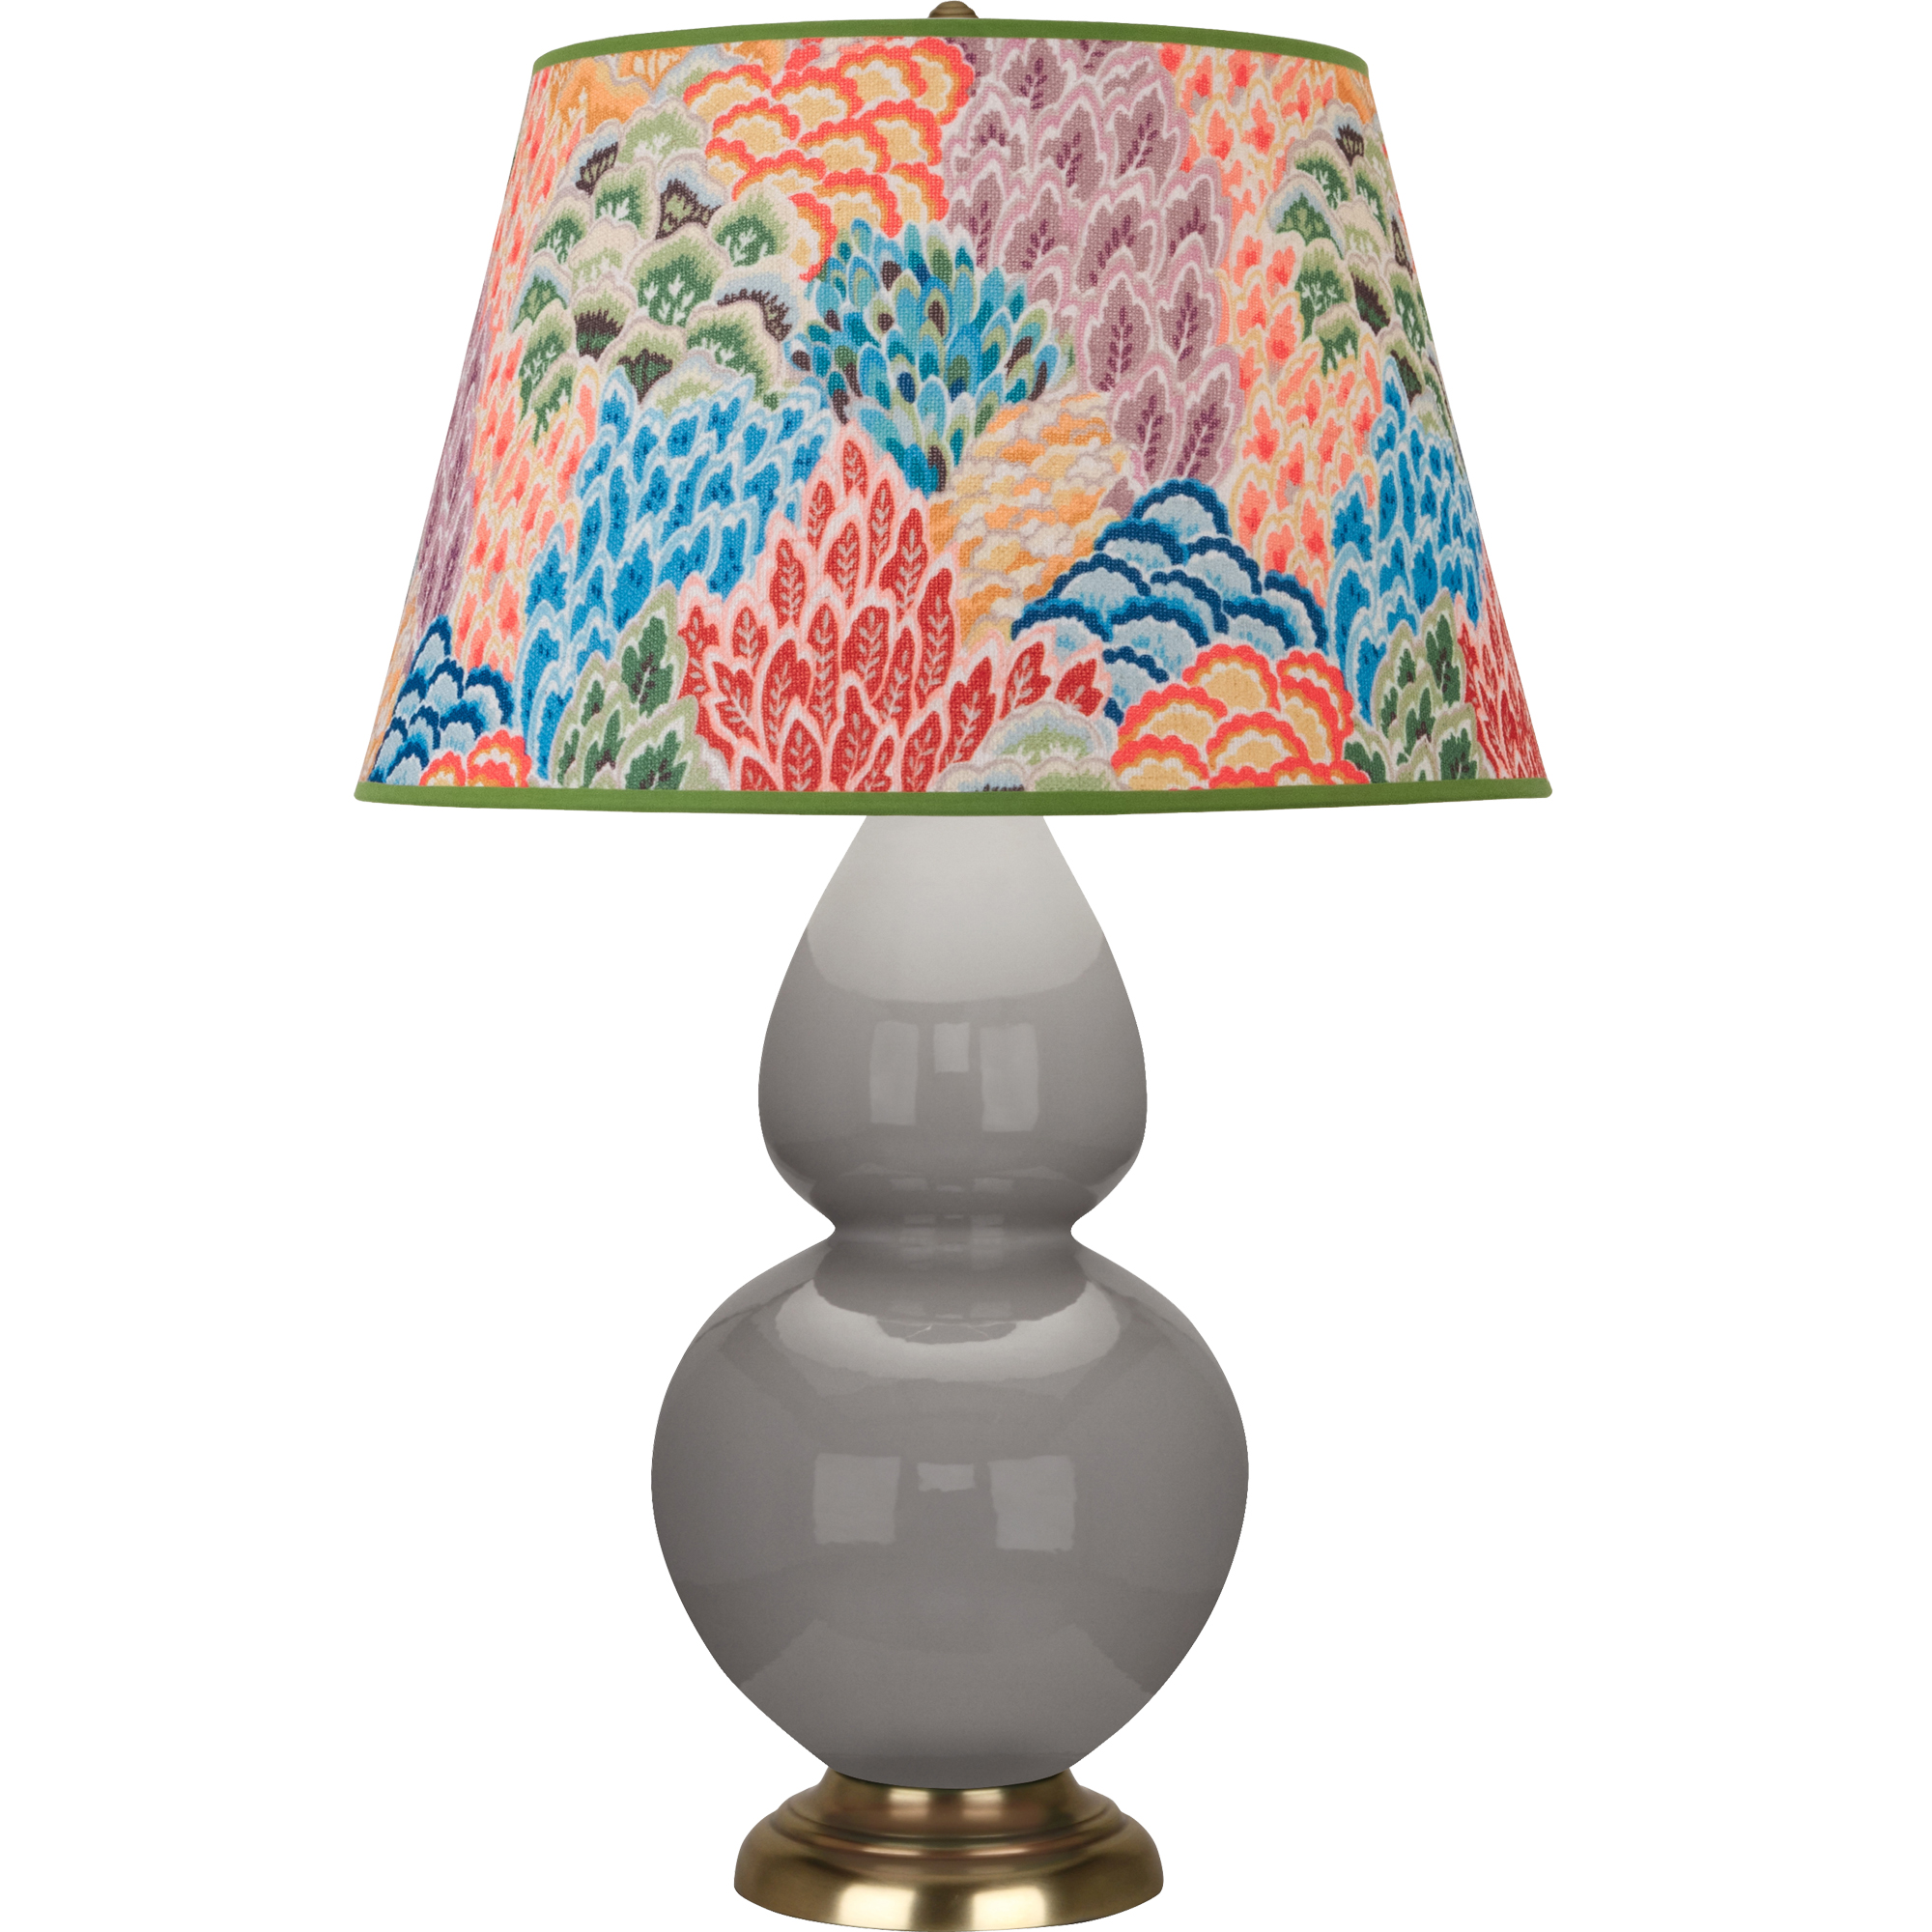 Double Gourd Table Lamp Style #1748S